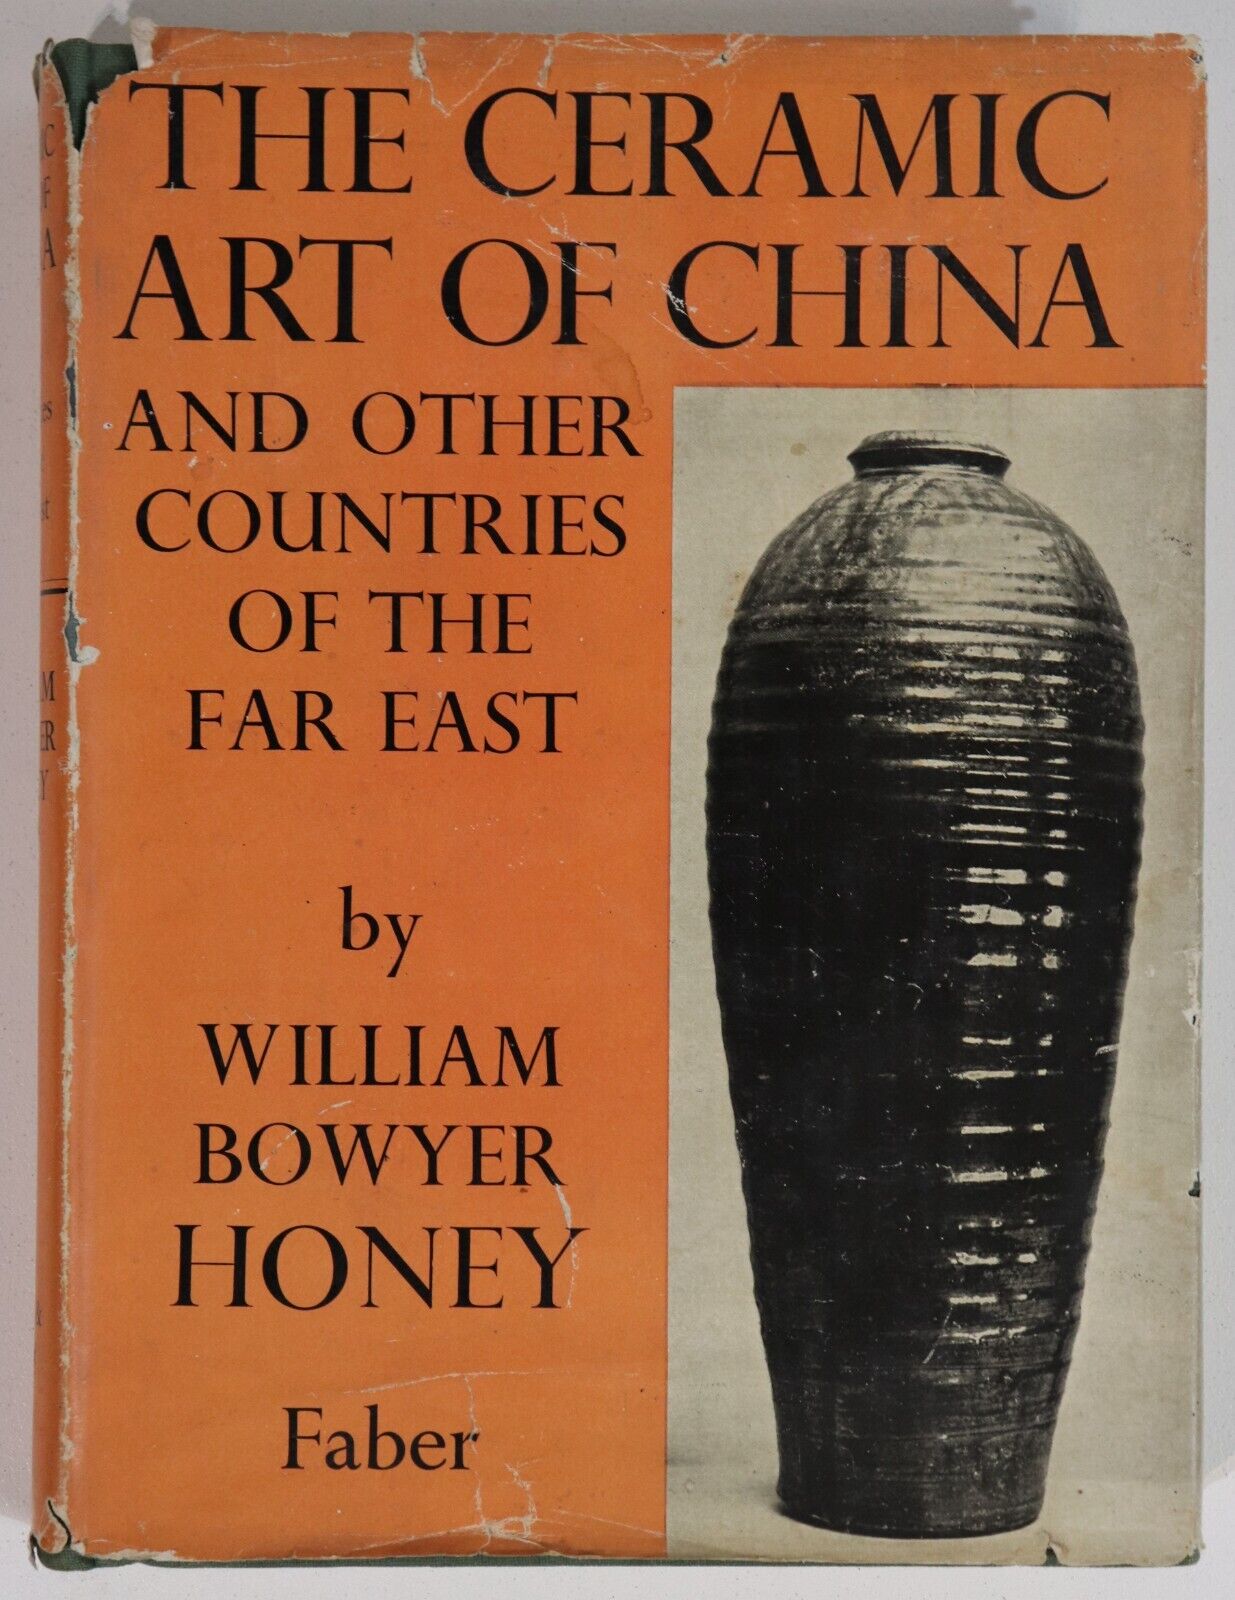 The Ceramic Art Of China - 1945 - 1st Edition Antique Collectible Reference Book